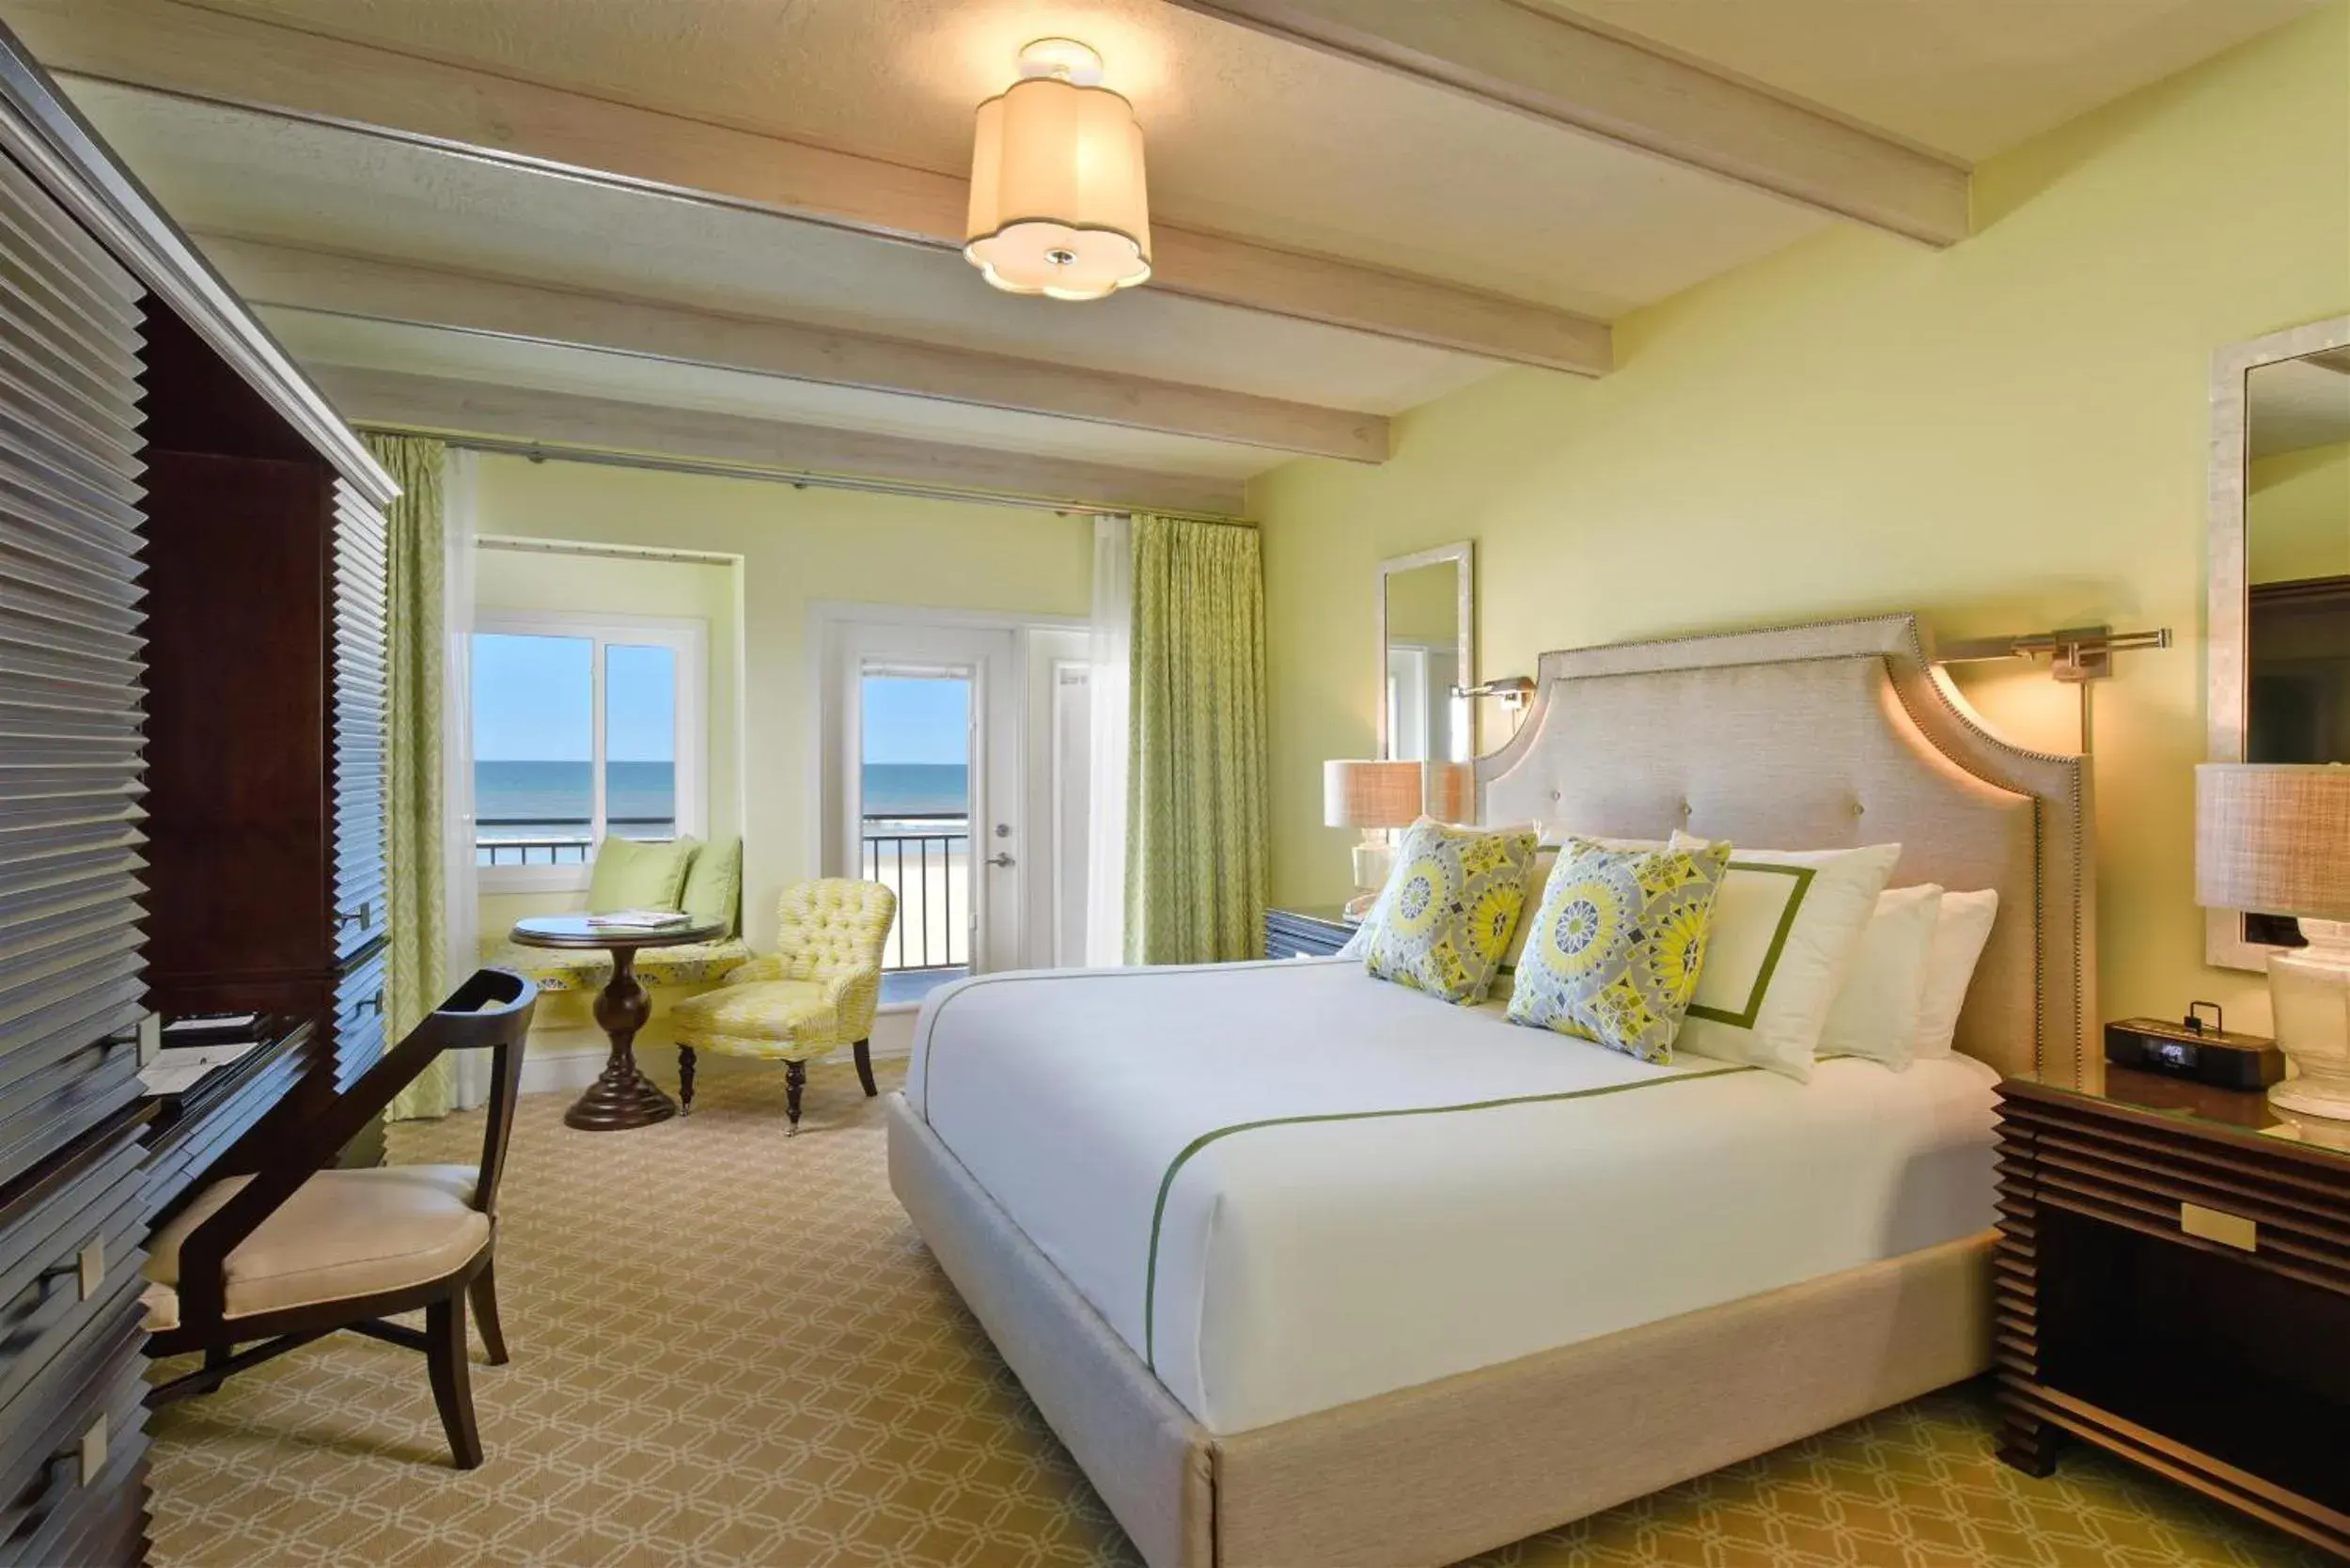 Sea view, Room Photo in The Lodge & Club at Ponte Vedra Beach